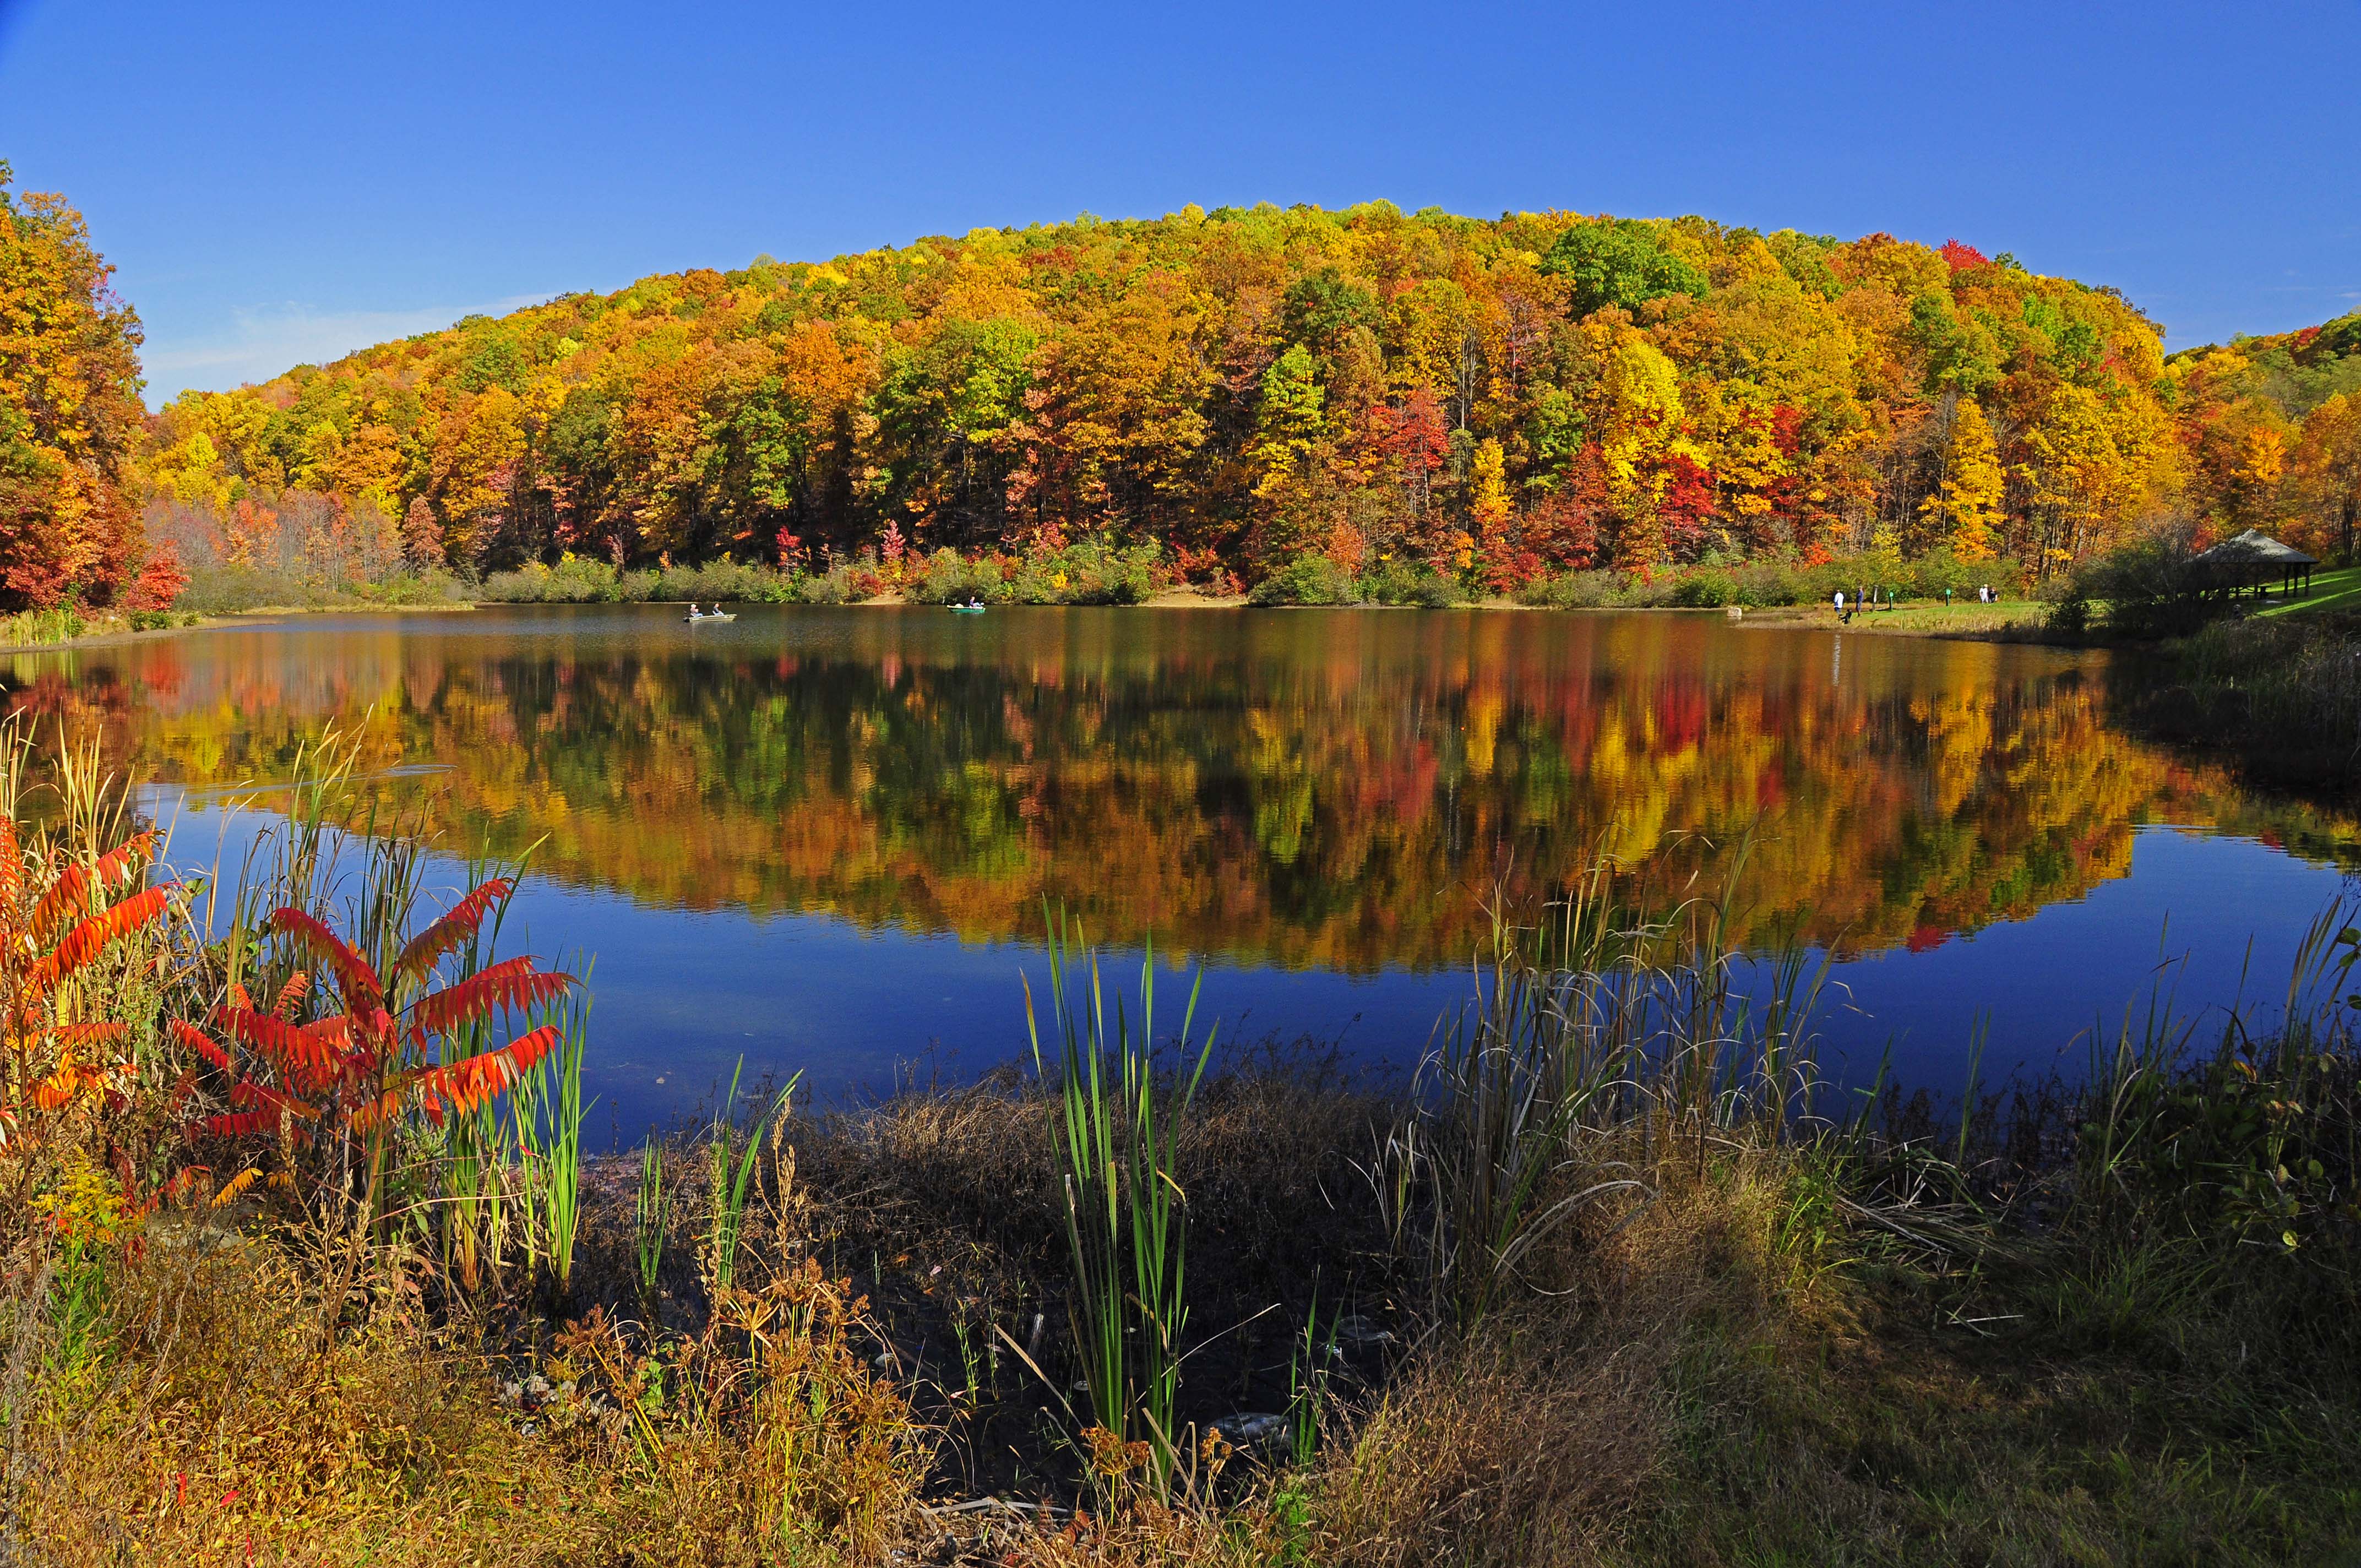 Coopers Rock State Forest is an excellent site to view colorful foliage in West Virginia.